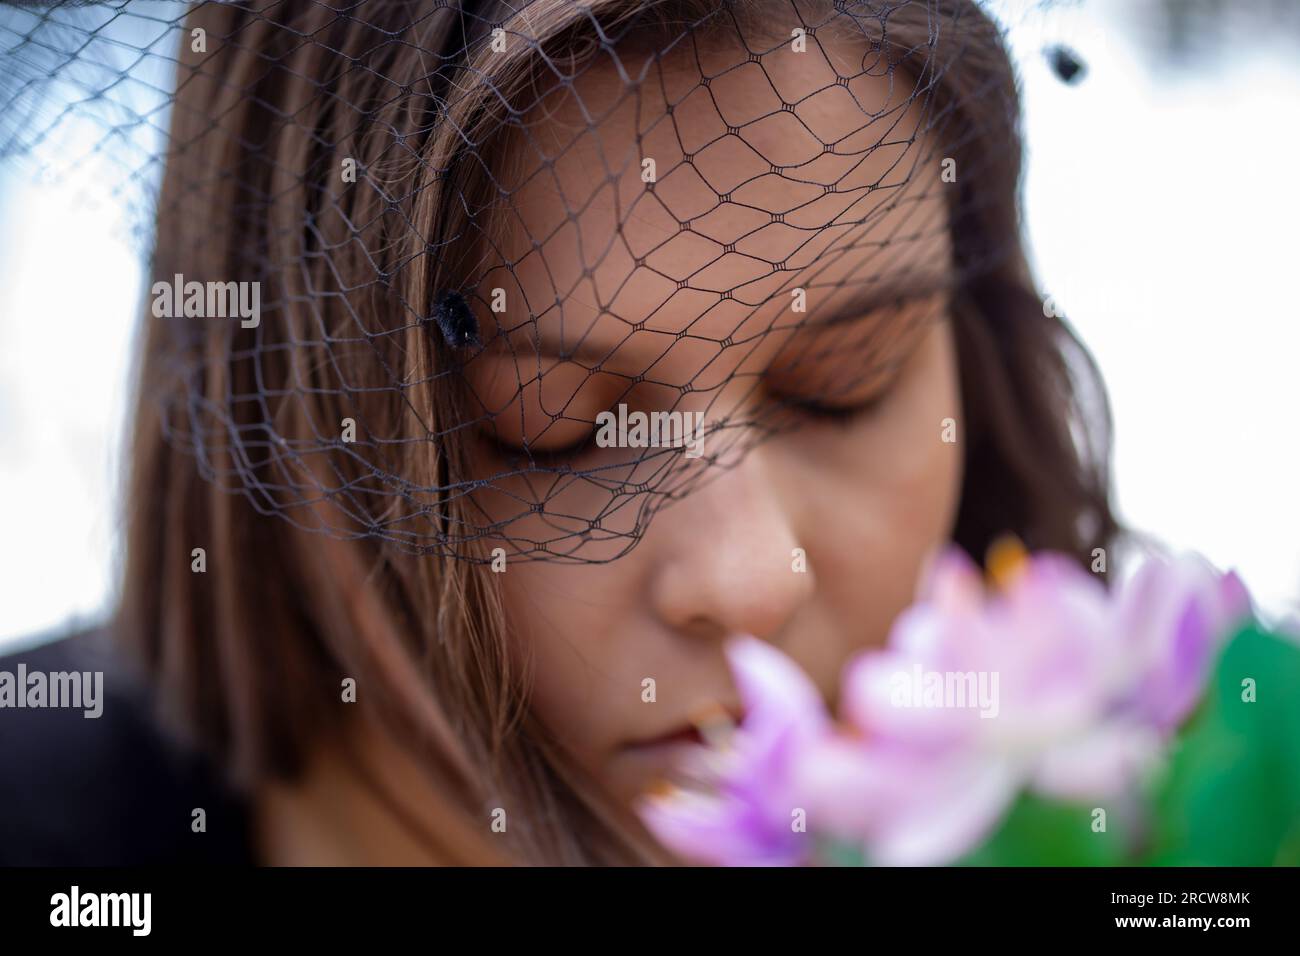 Close-up of a grieving young woman wearing a mourning veil (symbol image, model released) Stock Photo